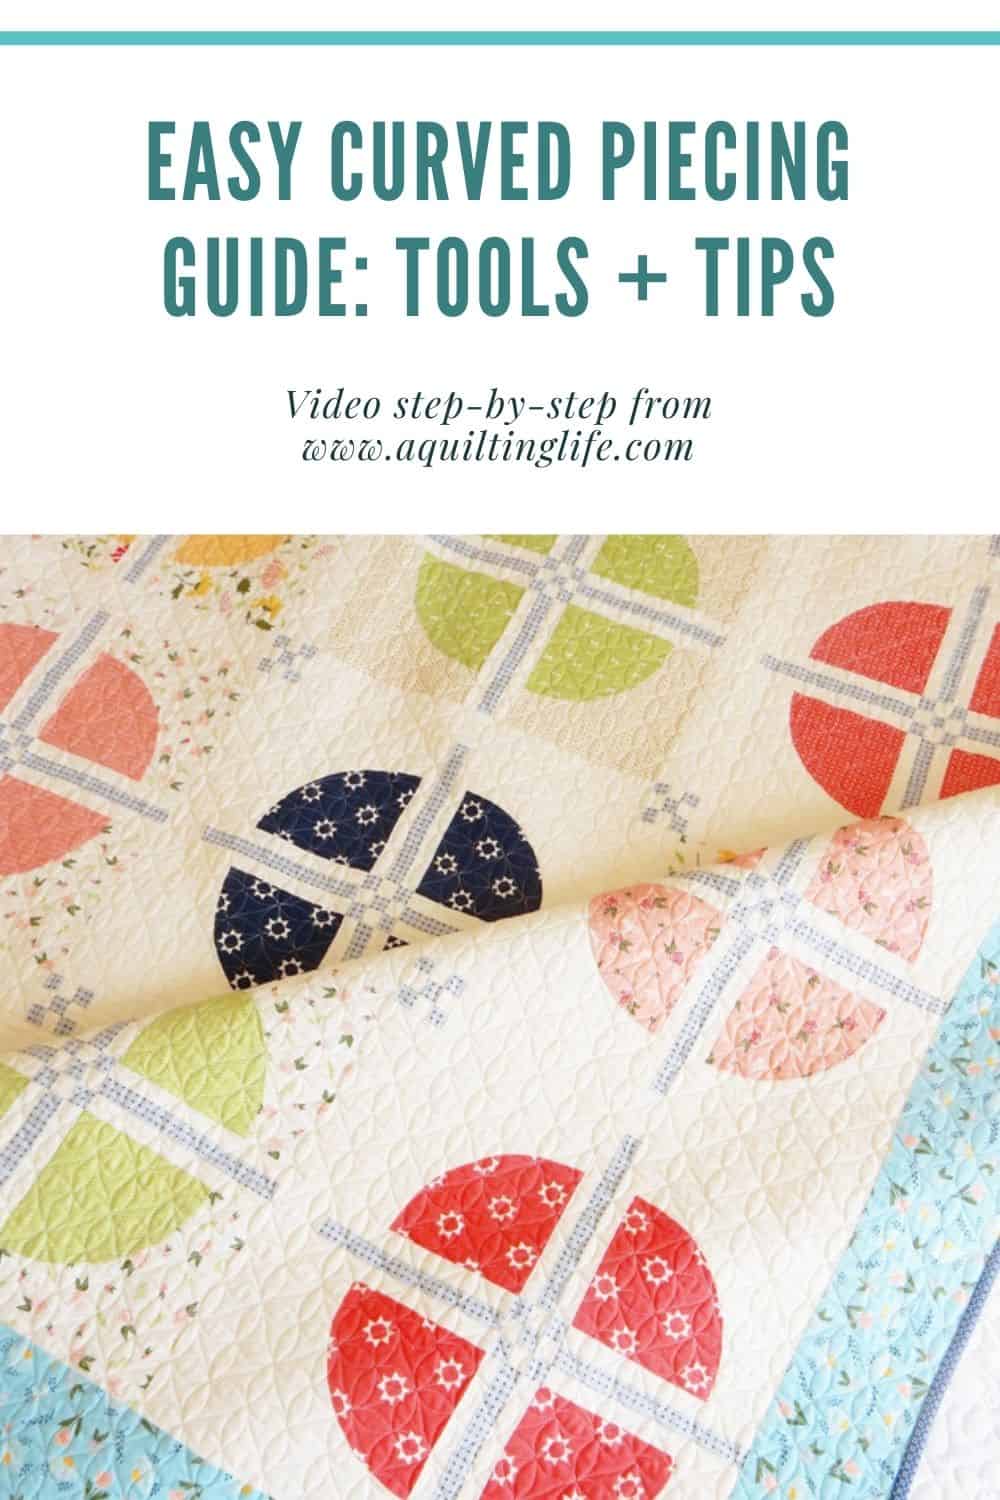 Easy Curved Piecing Guide: Tools & Tips featured by Top US Quilt Blog, A Quilting Life